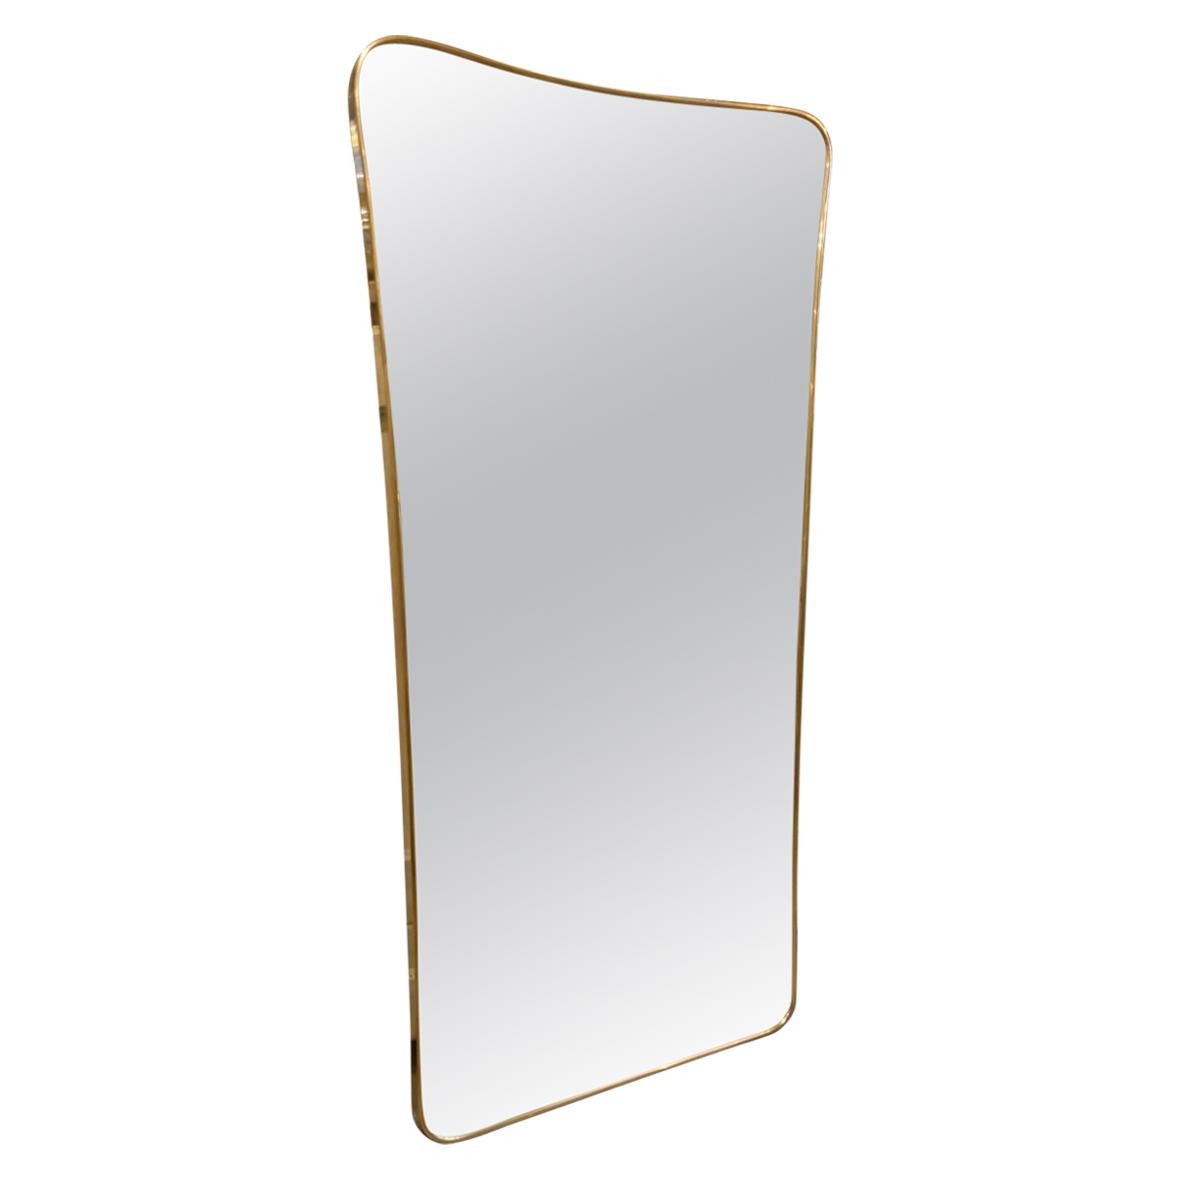 Beautiful Brass Mirror-Lovely Curved Frame, 1950s, Italy